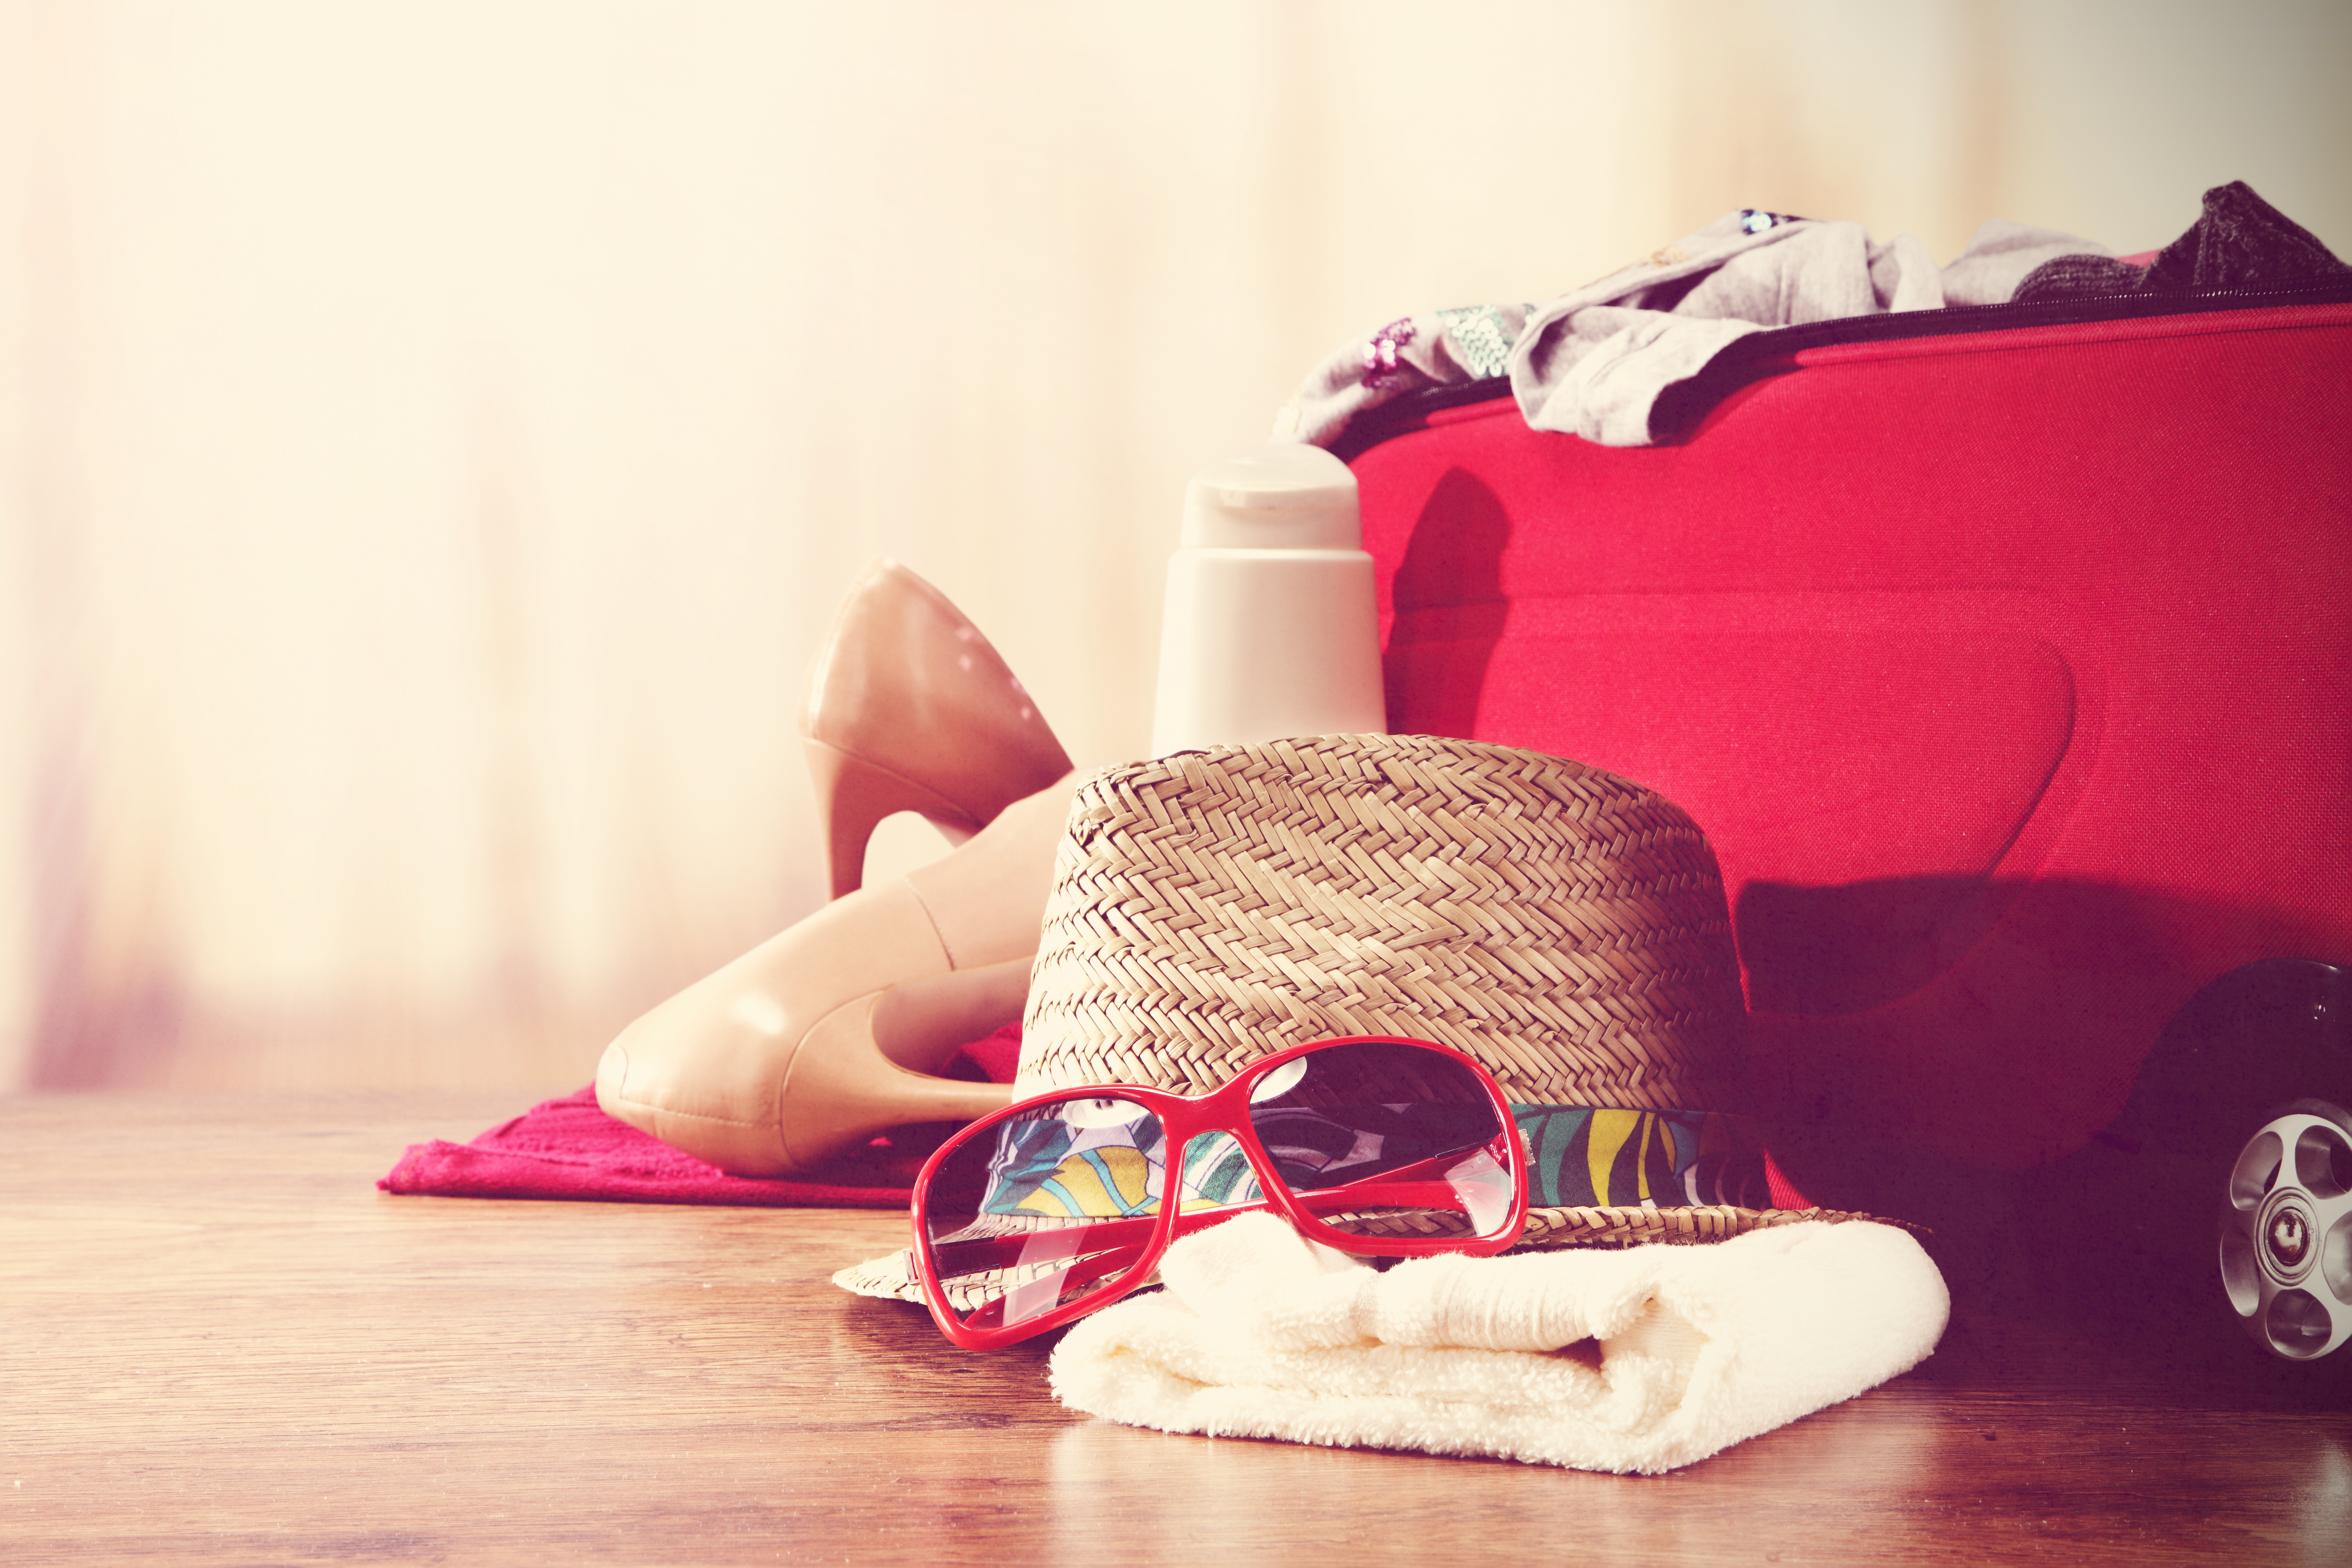 A suitcase being packed | Source: Shutterstock